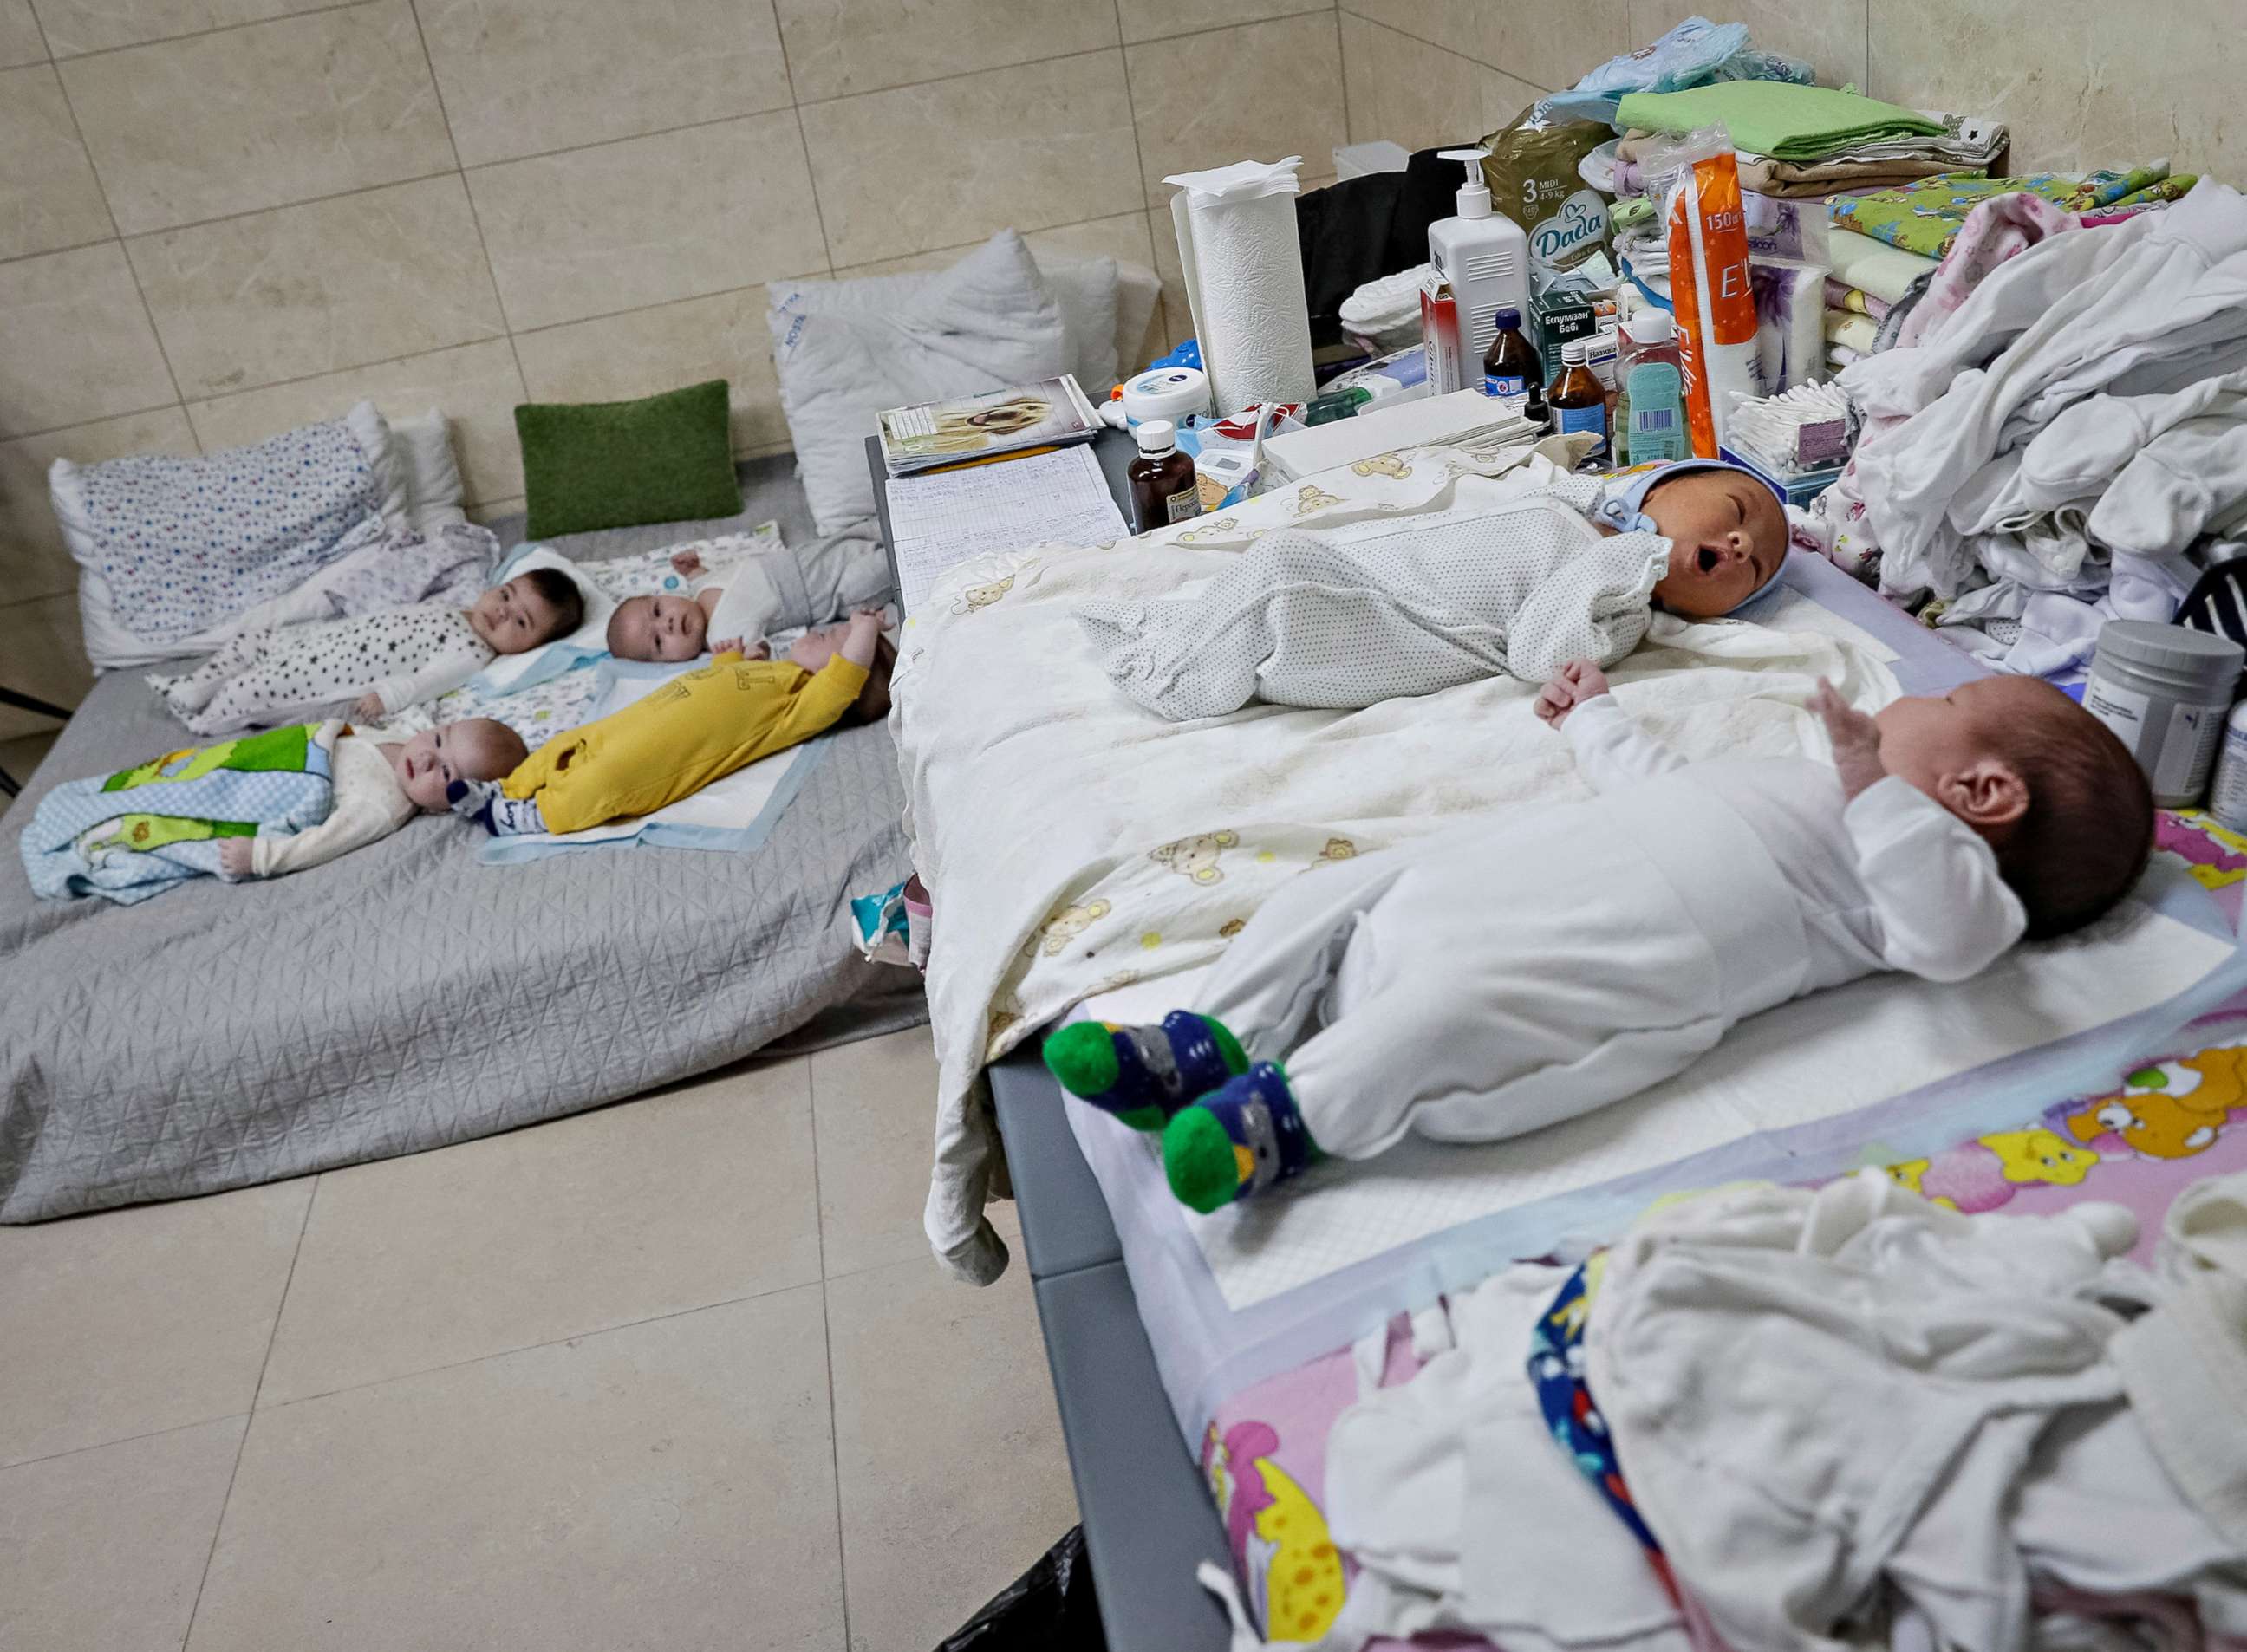 PHOTO: Surrogate-born babies rest inside a shelter owned by BioTexCom clinic in a residential basement on the outskirts of Kyiv, Ukraine, March 15, 2022.